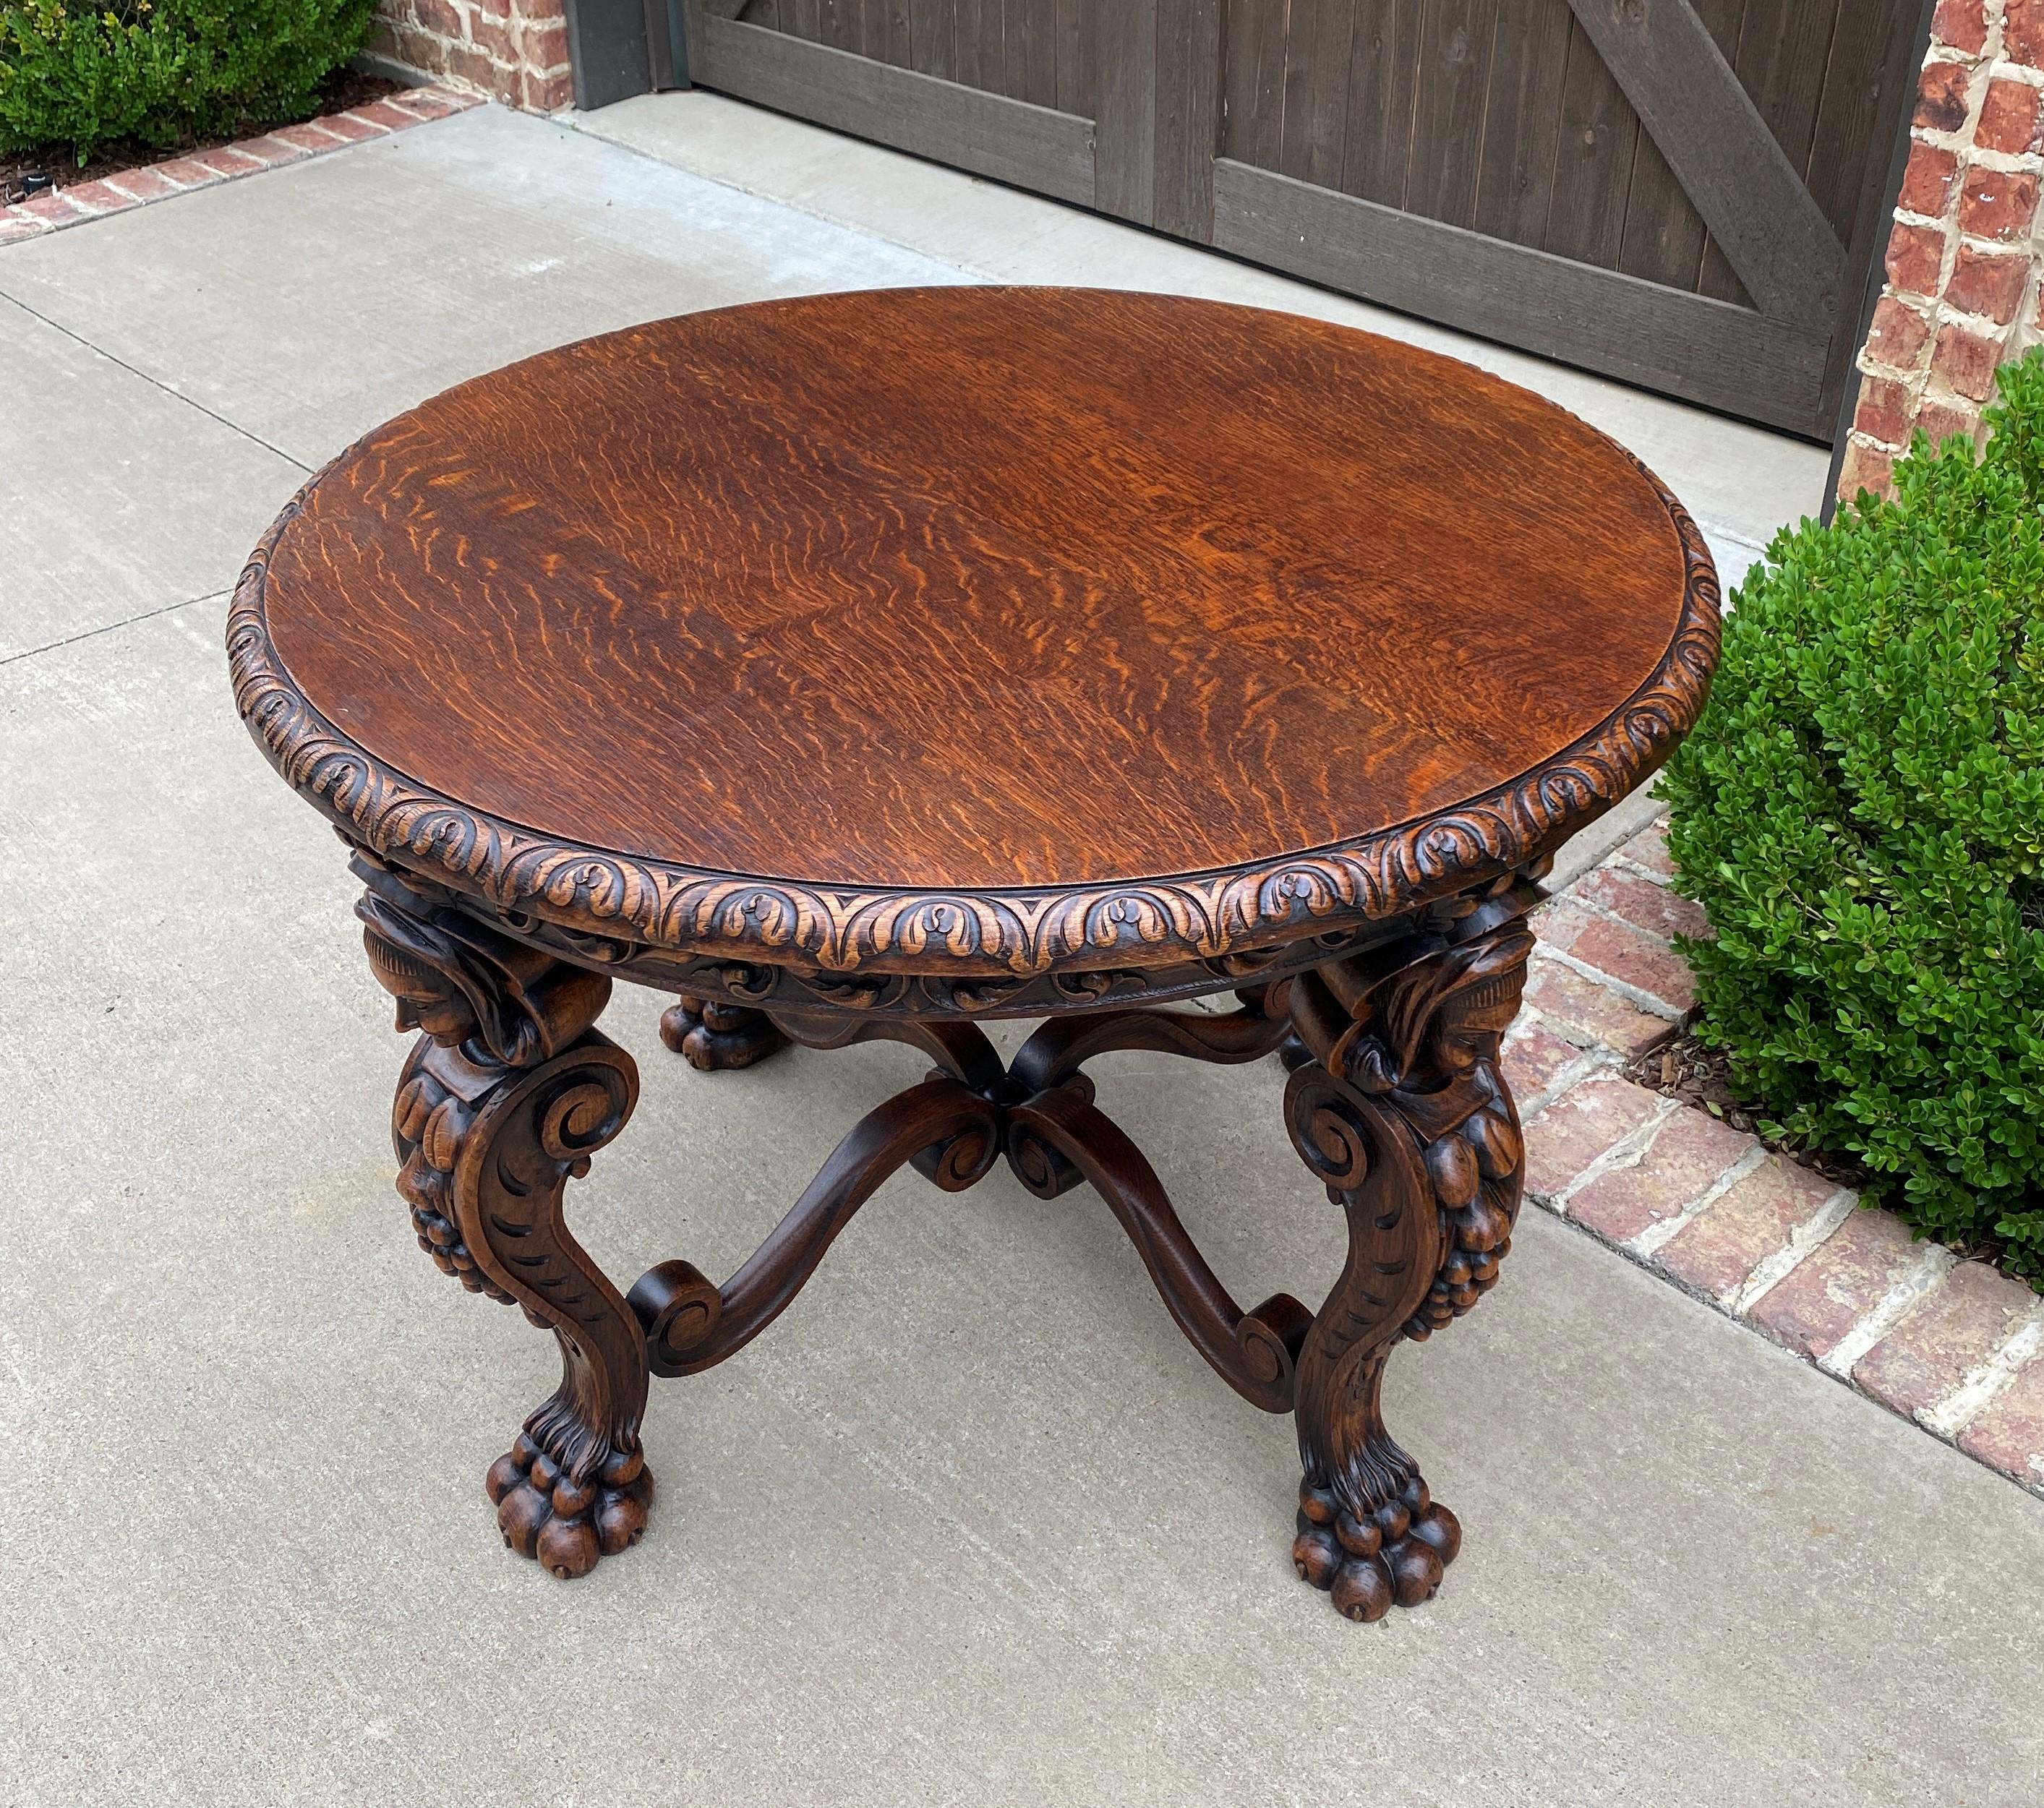 Antique French Round Table Entry Sofa Foyer Coffee Table Renaissance Revival Oak For Sale 9